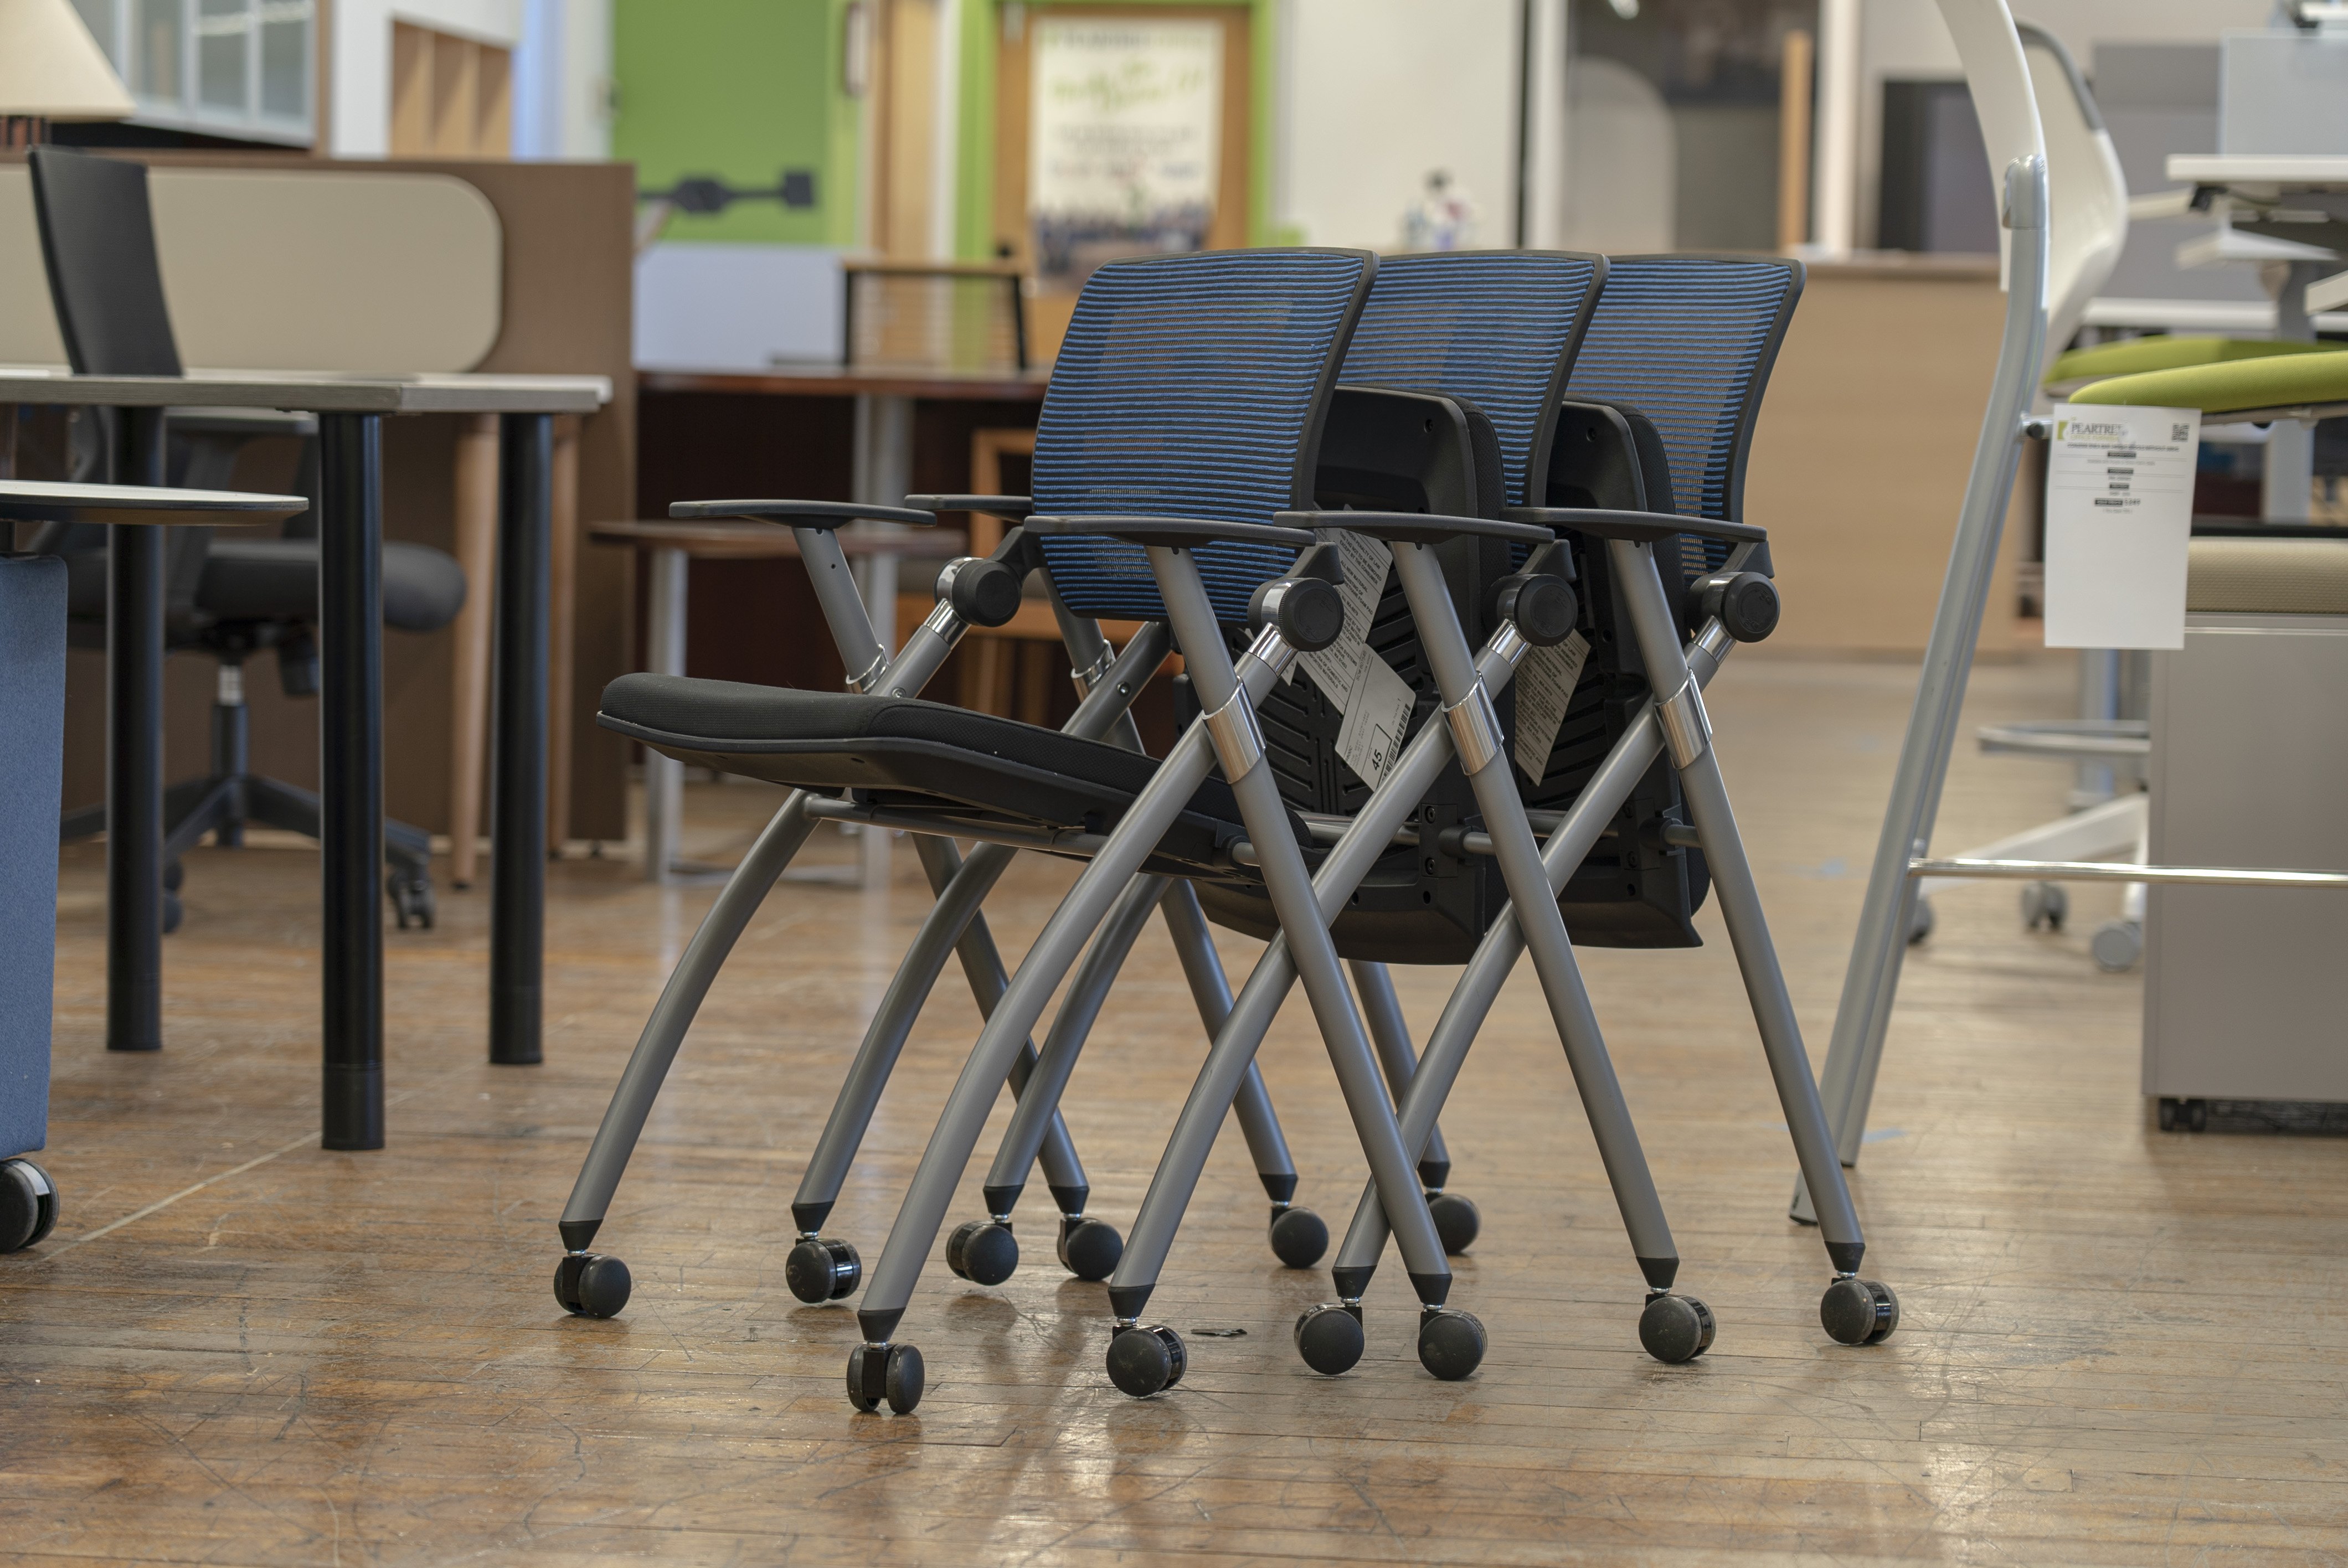 ais-stow-multipurpose-nesting-chairs